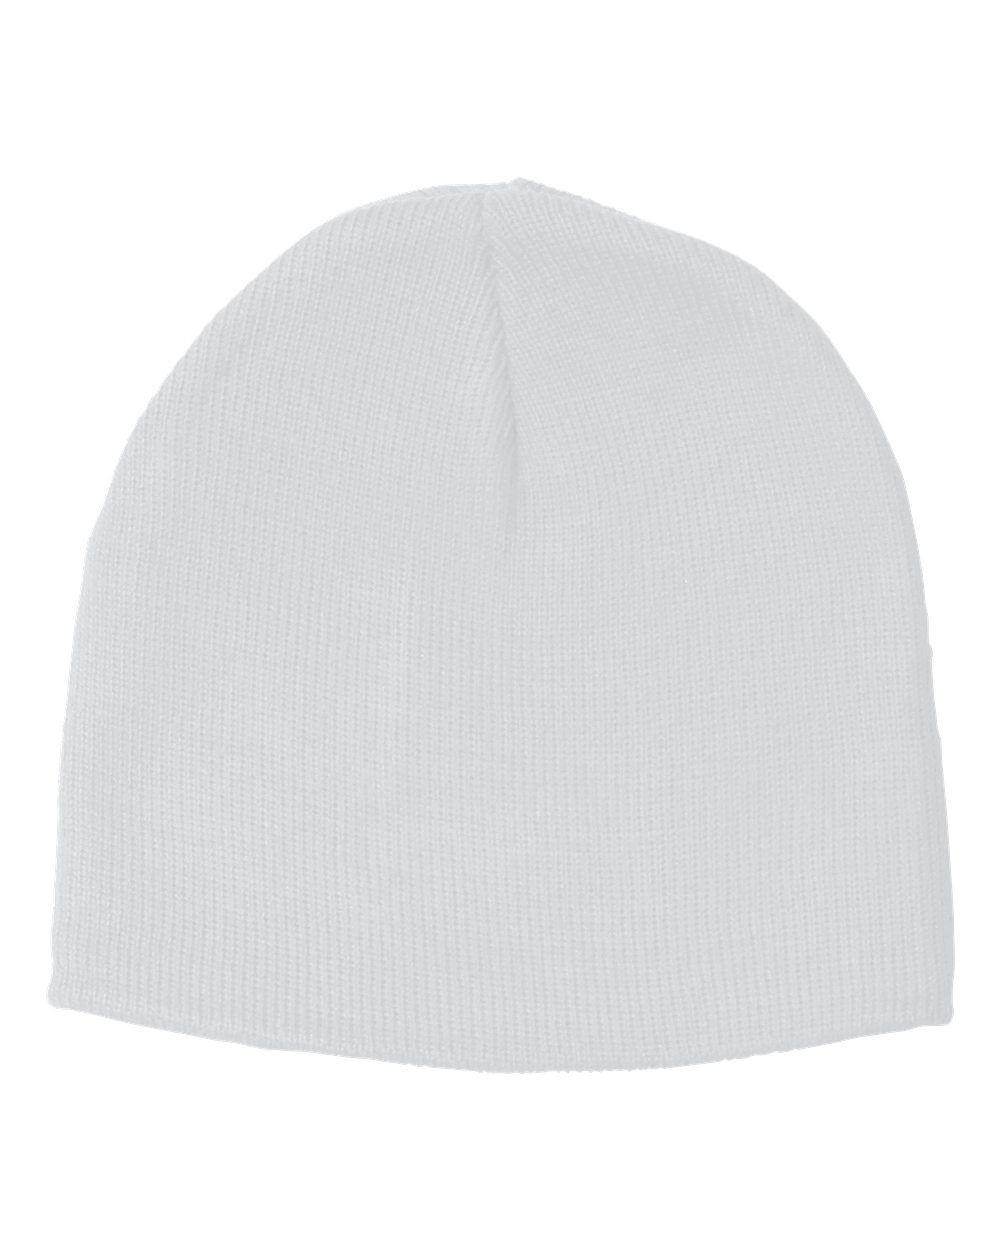 8.5" Knit Beanie Embroidery Blanks - White